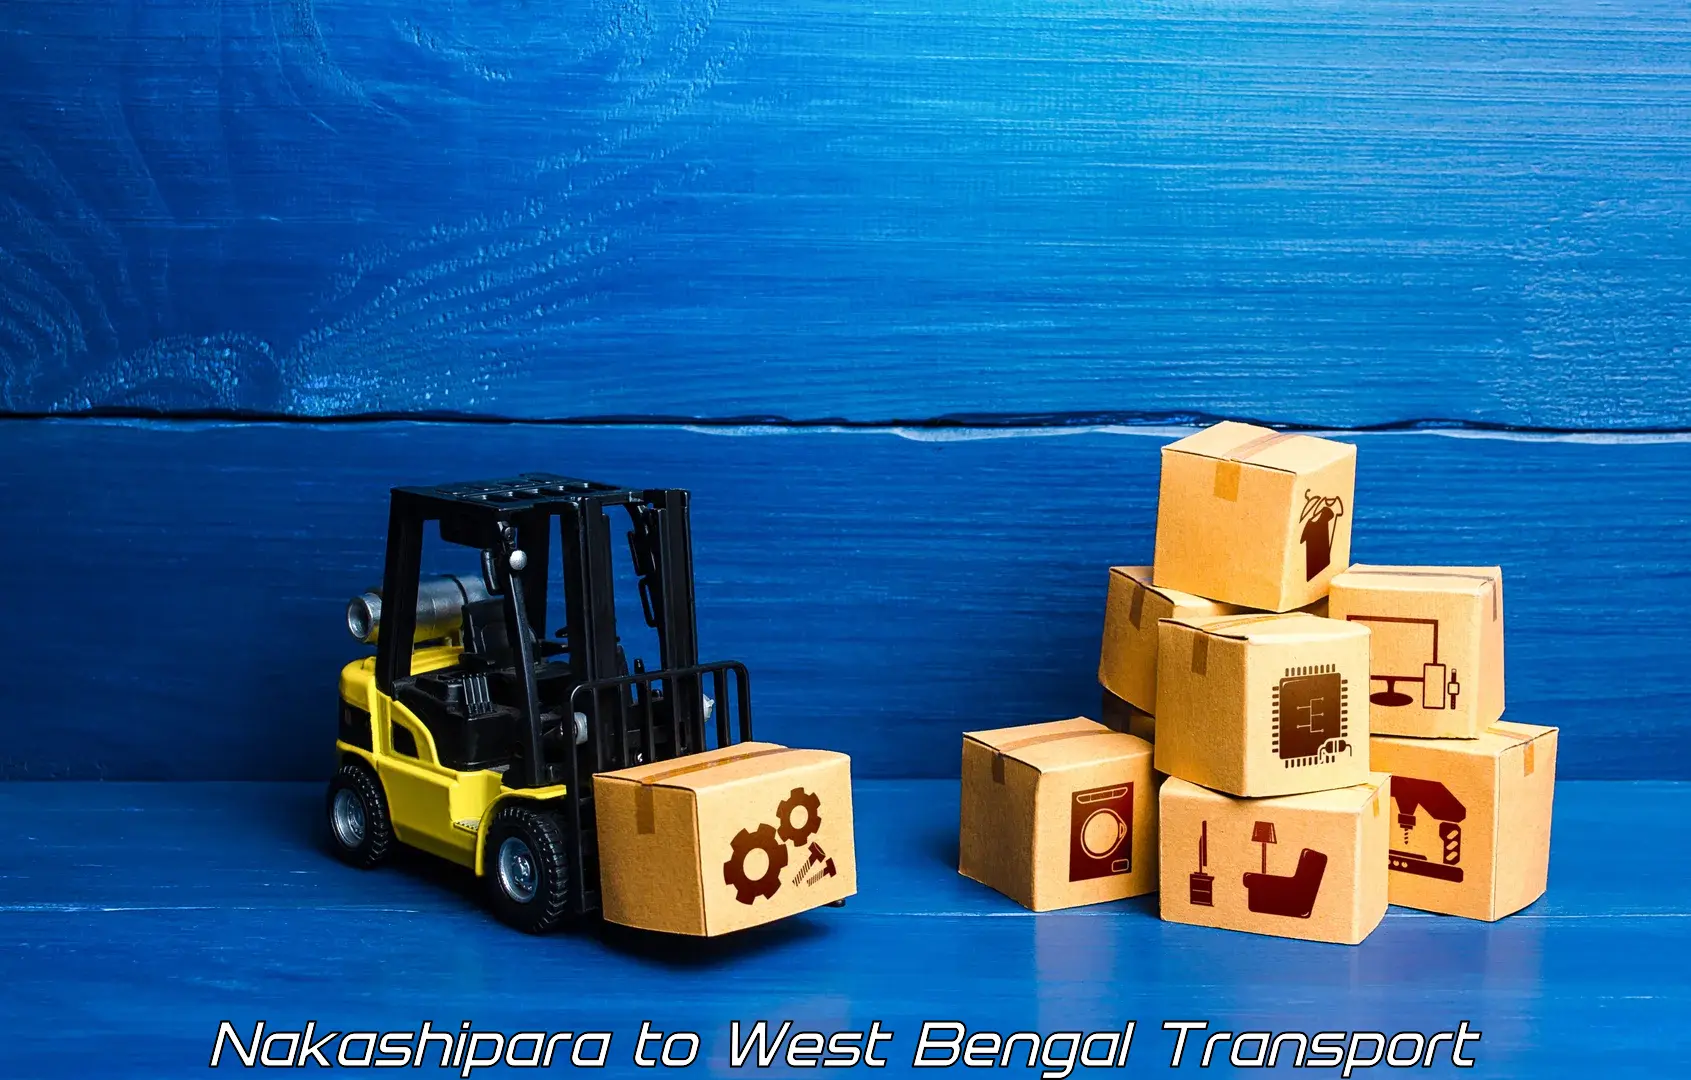 Air freight transport services in Nakashipara to Durgapur